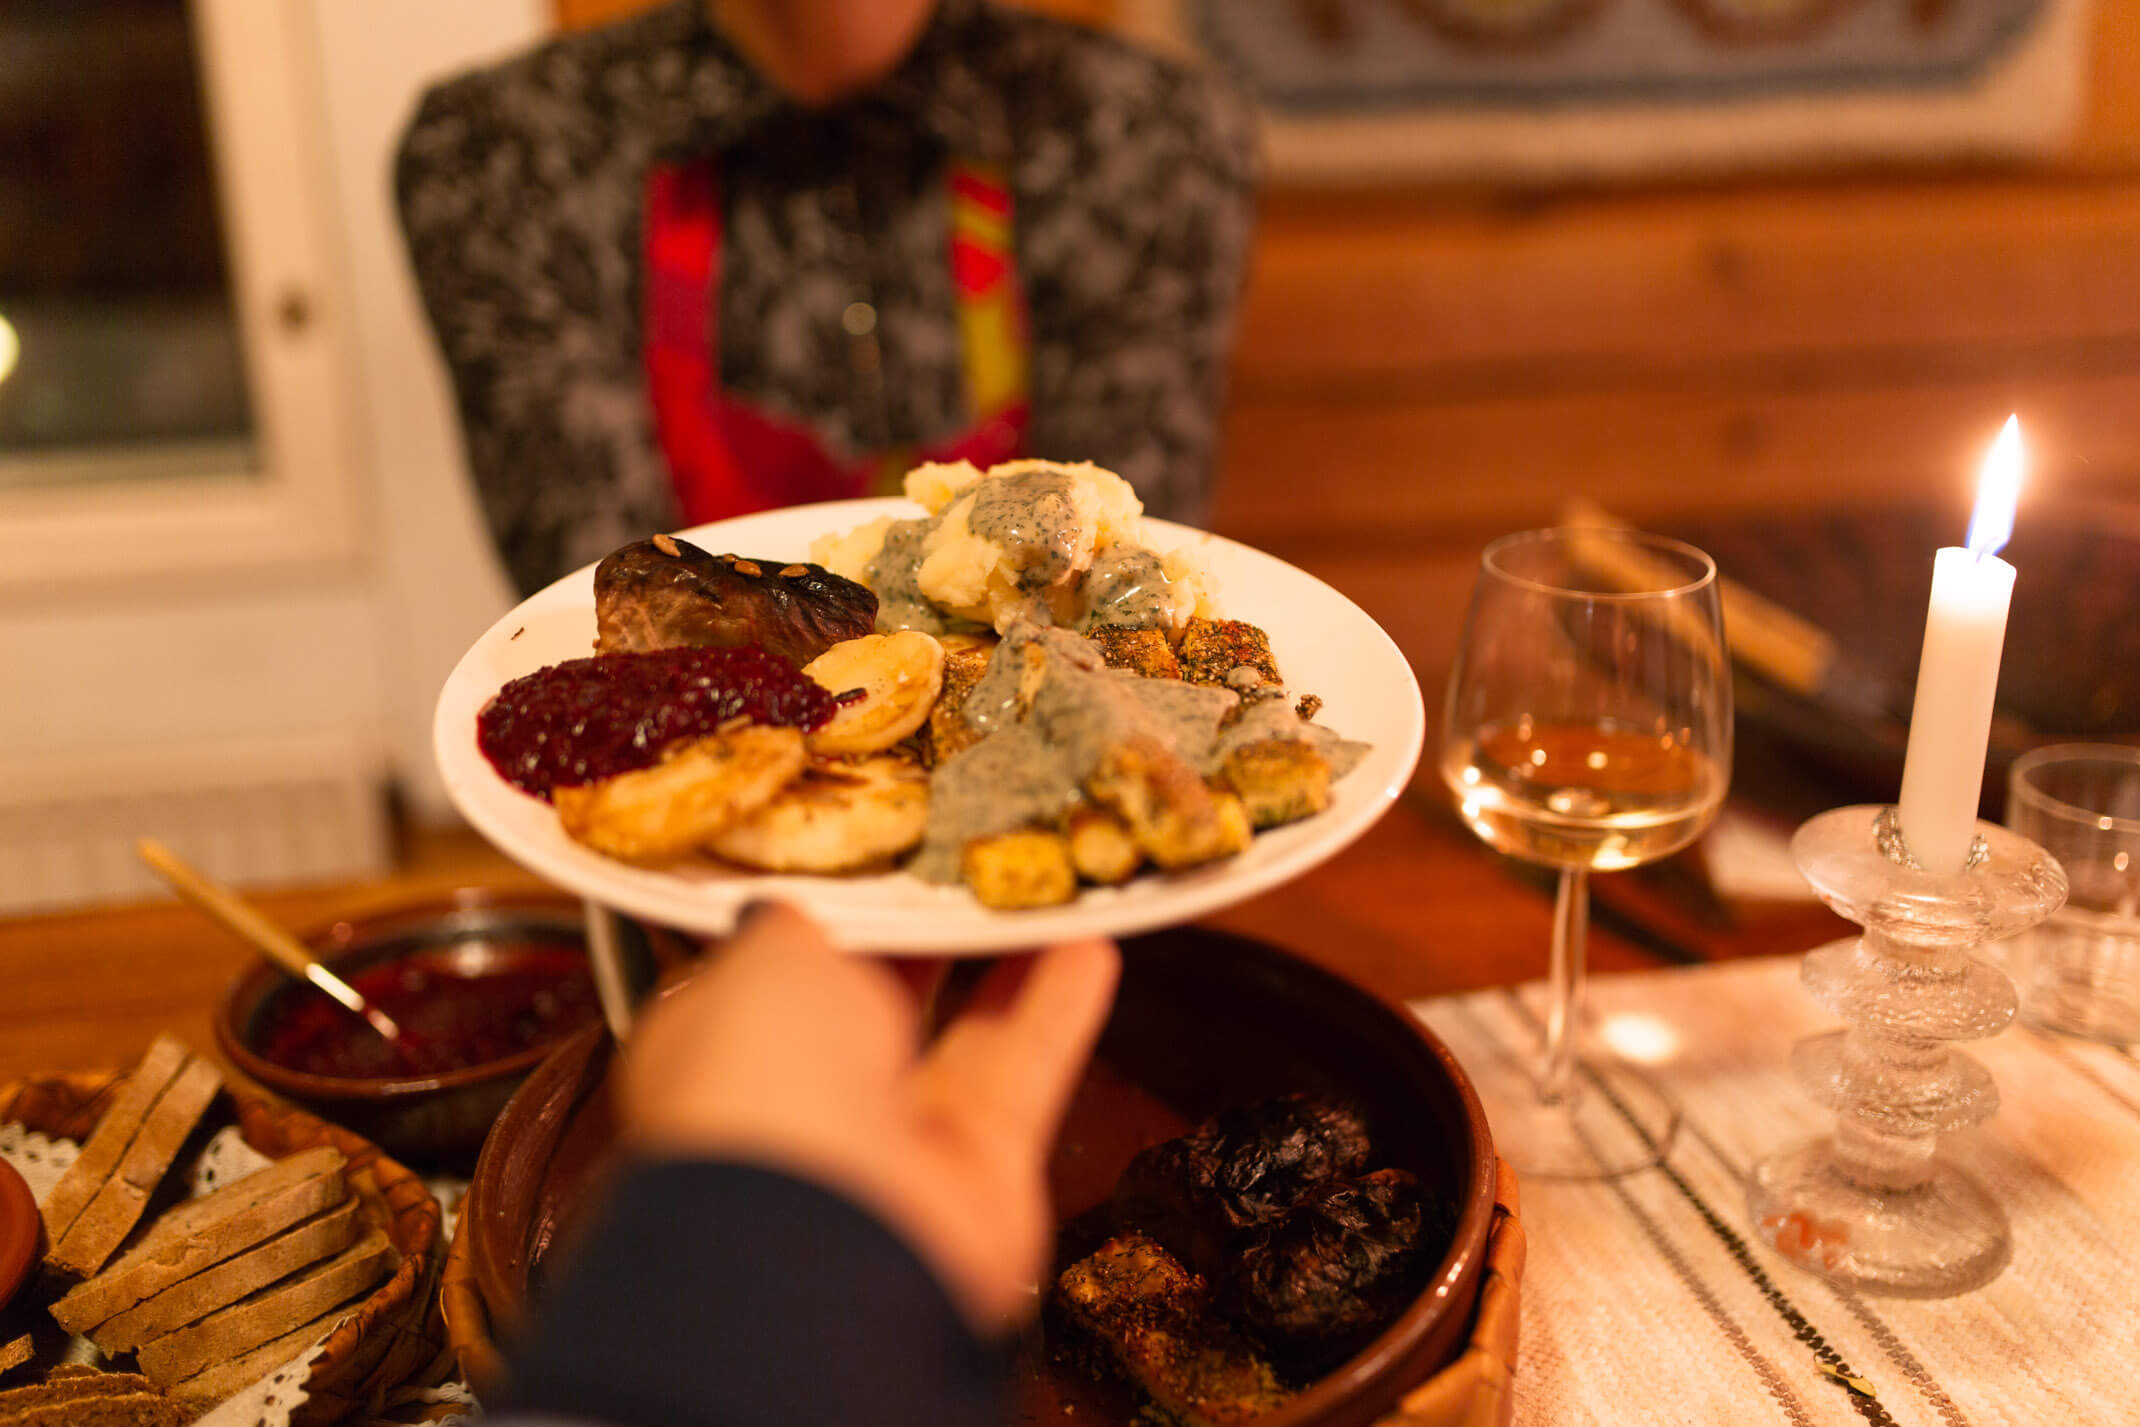 4 days in Finland: Snowshoeing, snowmobiling and a traditional Karelian cooking lesson